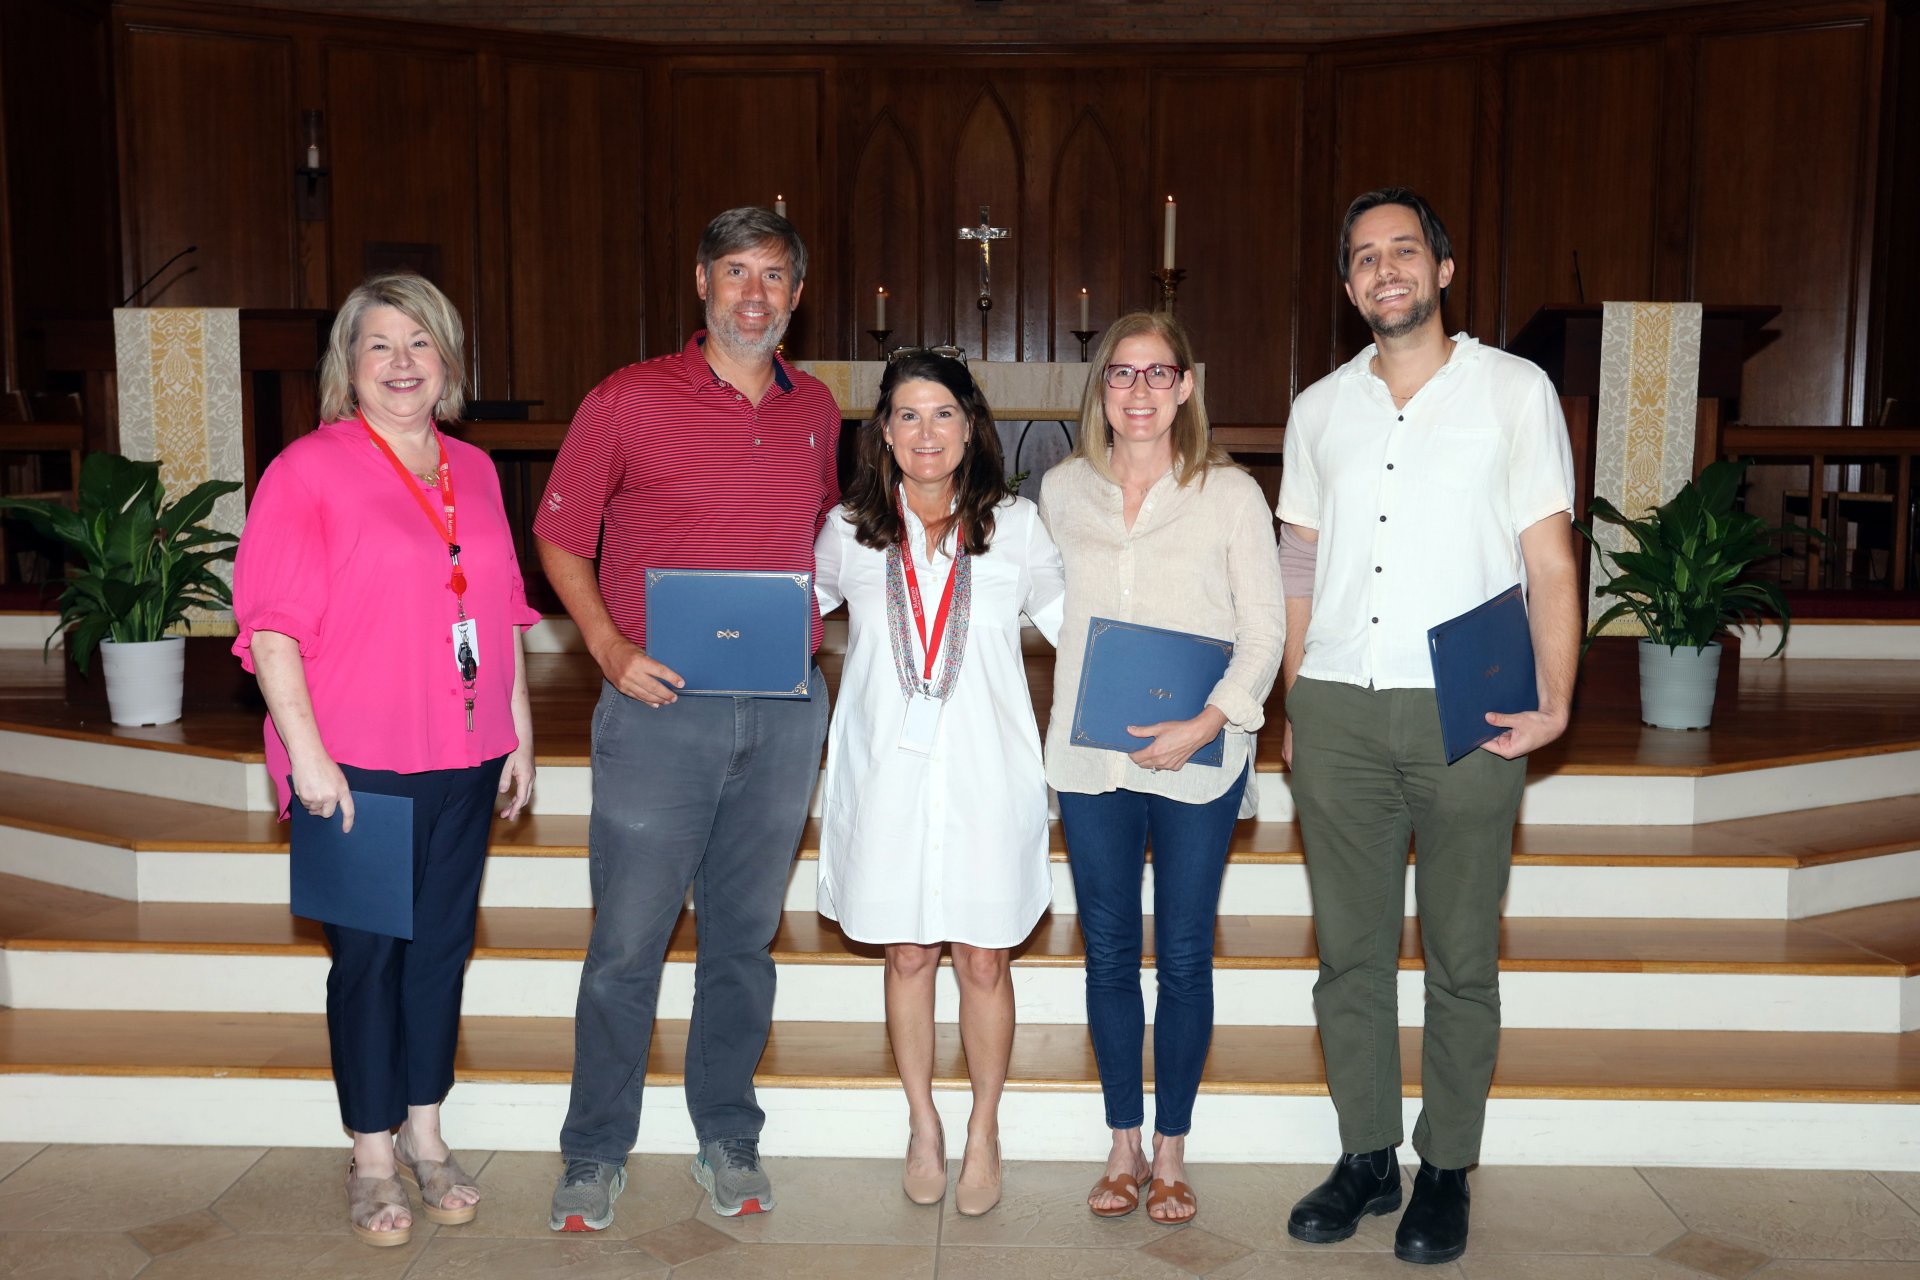 Faculty Celebrated at End of School Year with Chapel and Luncheon